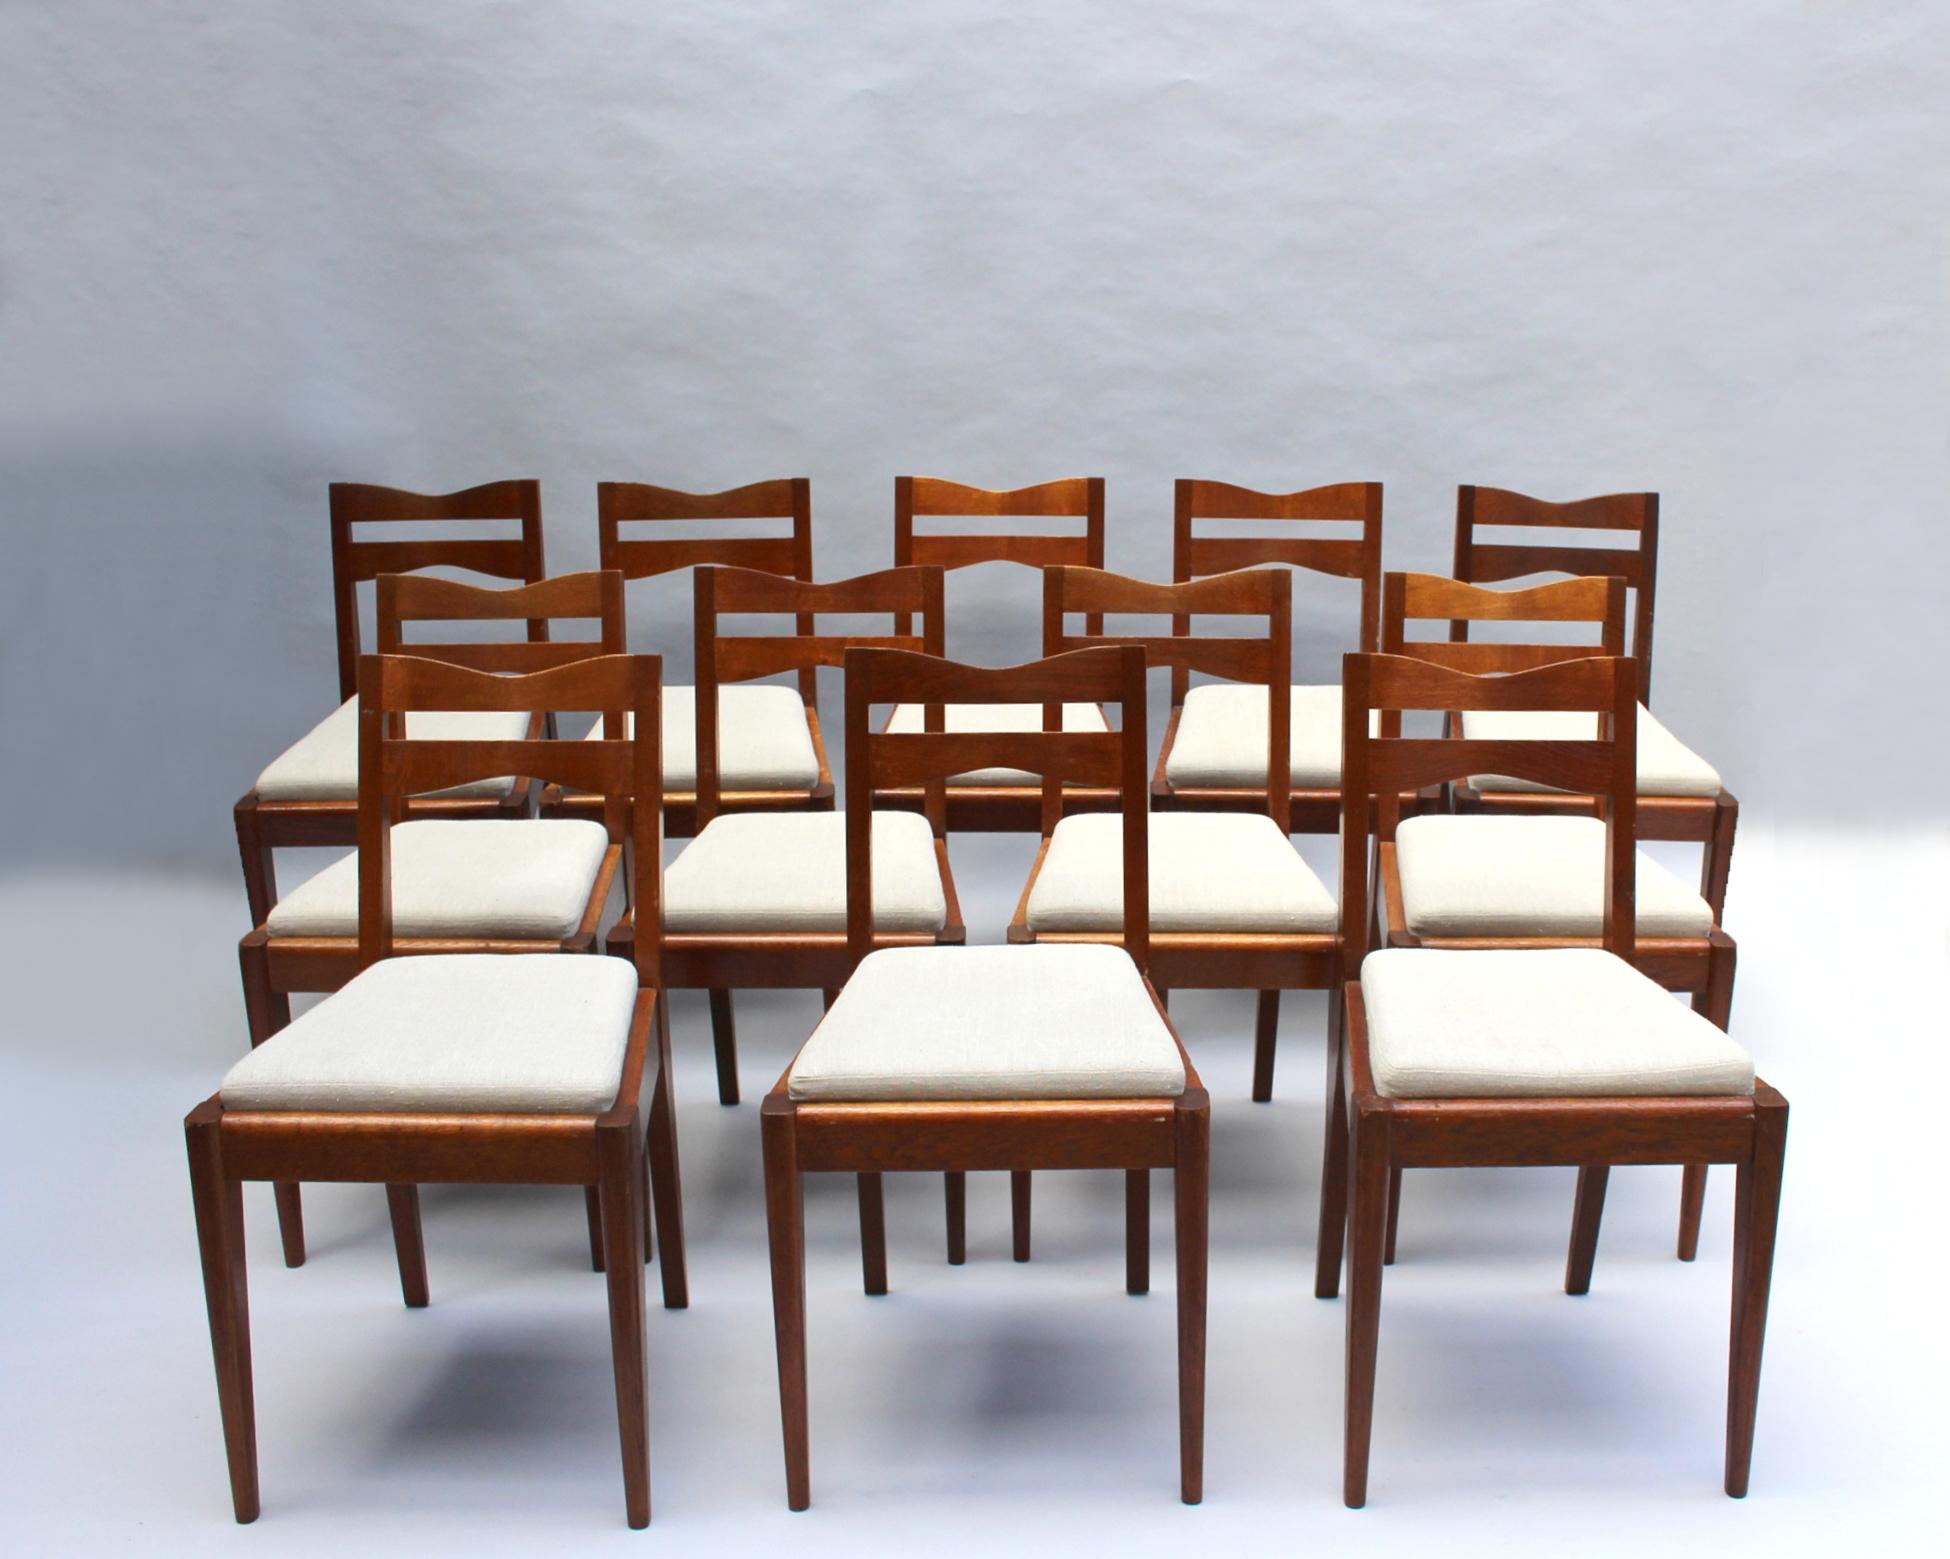 Charles Dudouyt - A set of 12 fine French Art Deco dining chairs in solid oak.
Half of them are stamped.

